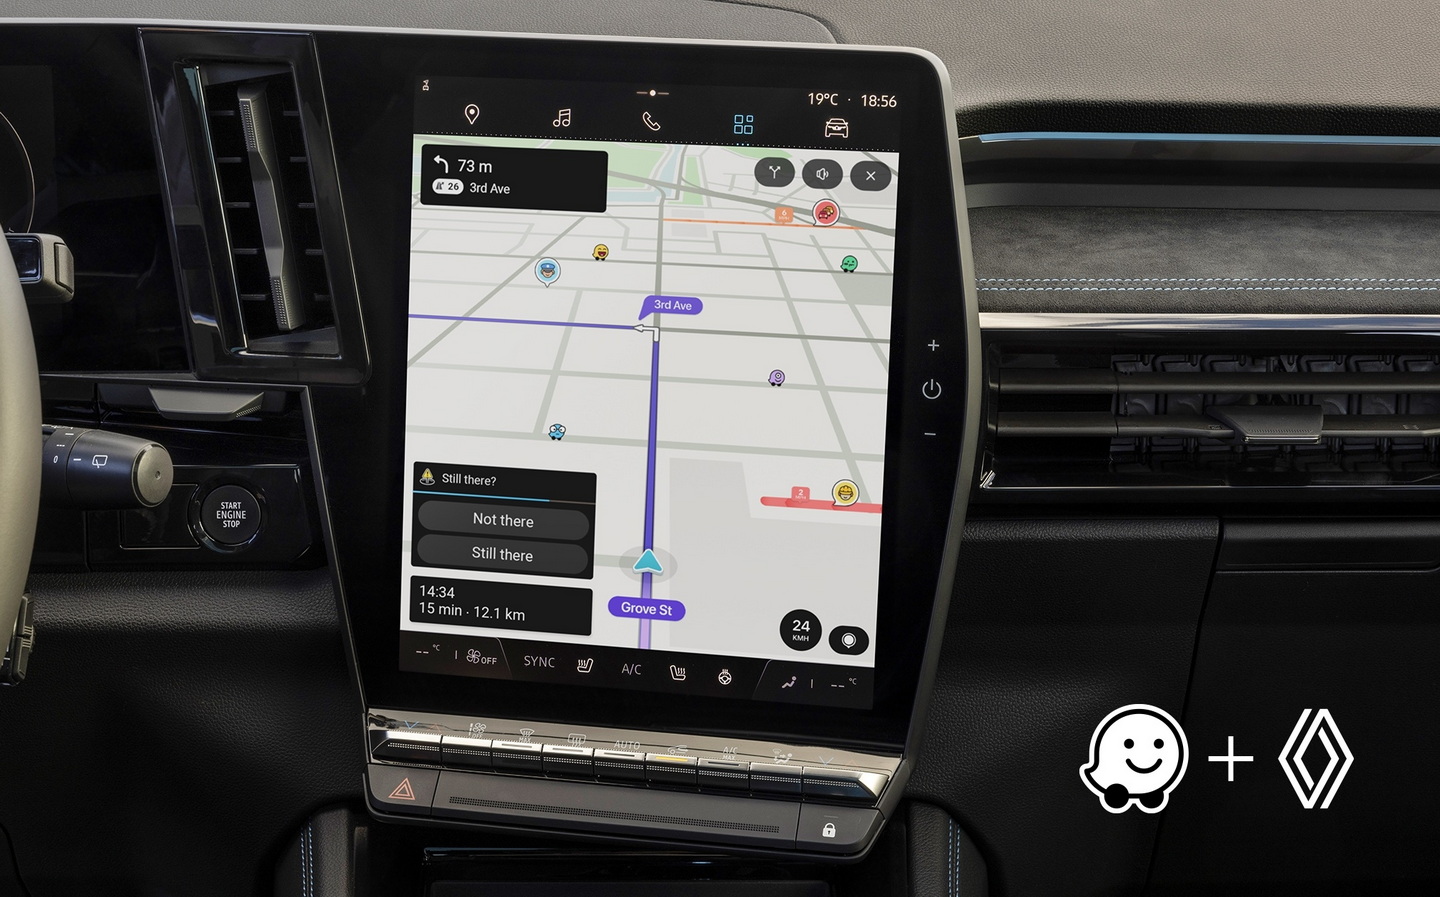 Renault to embed Waze in its cars